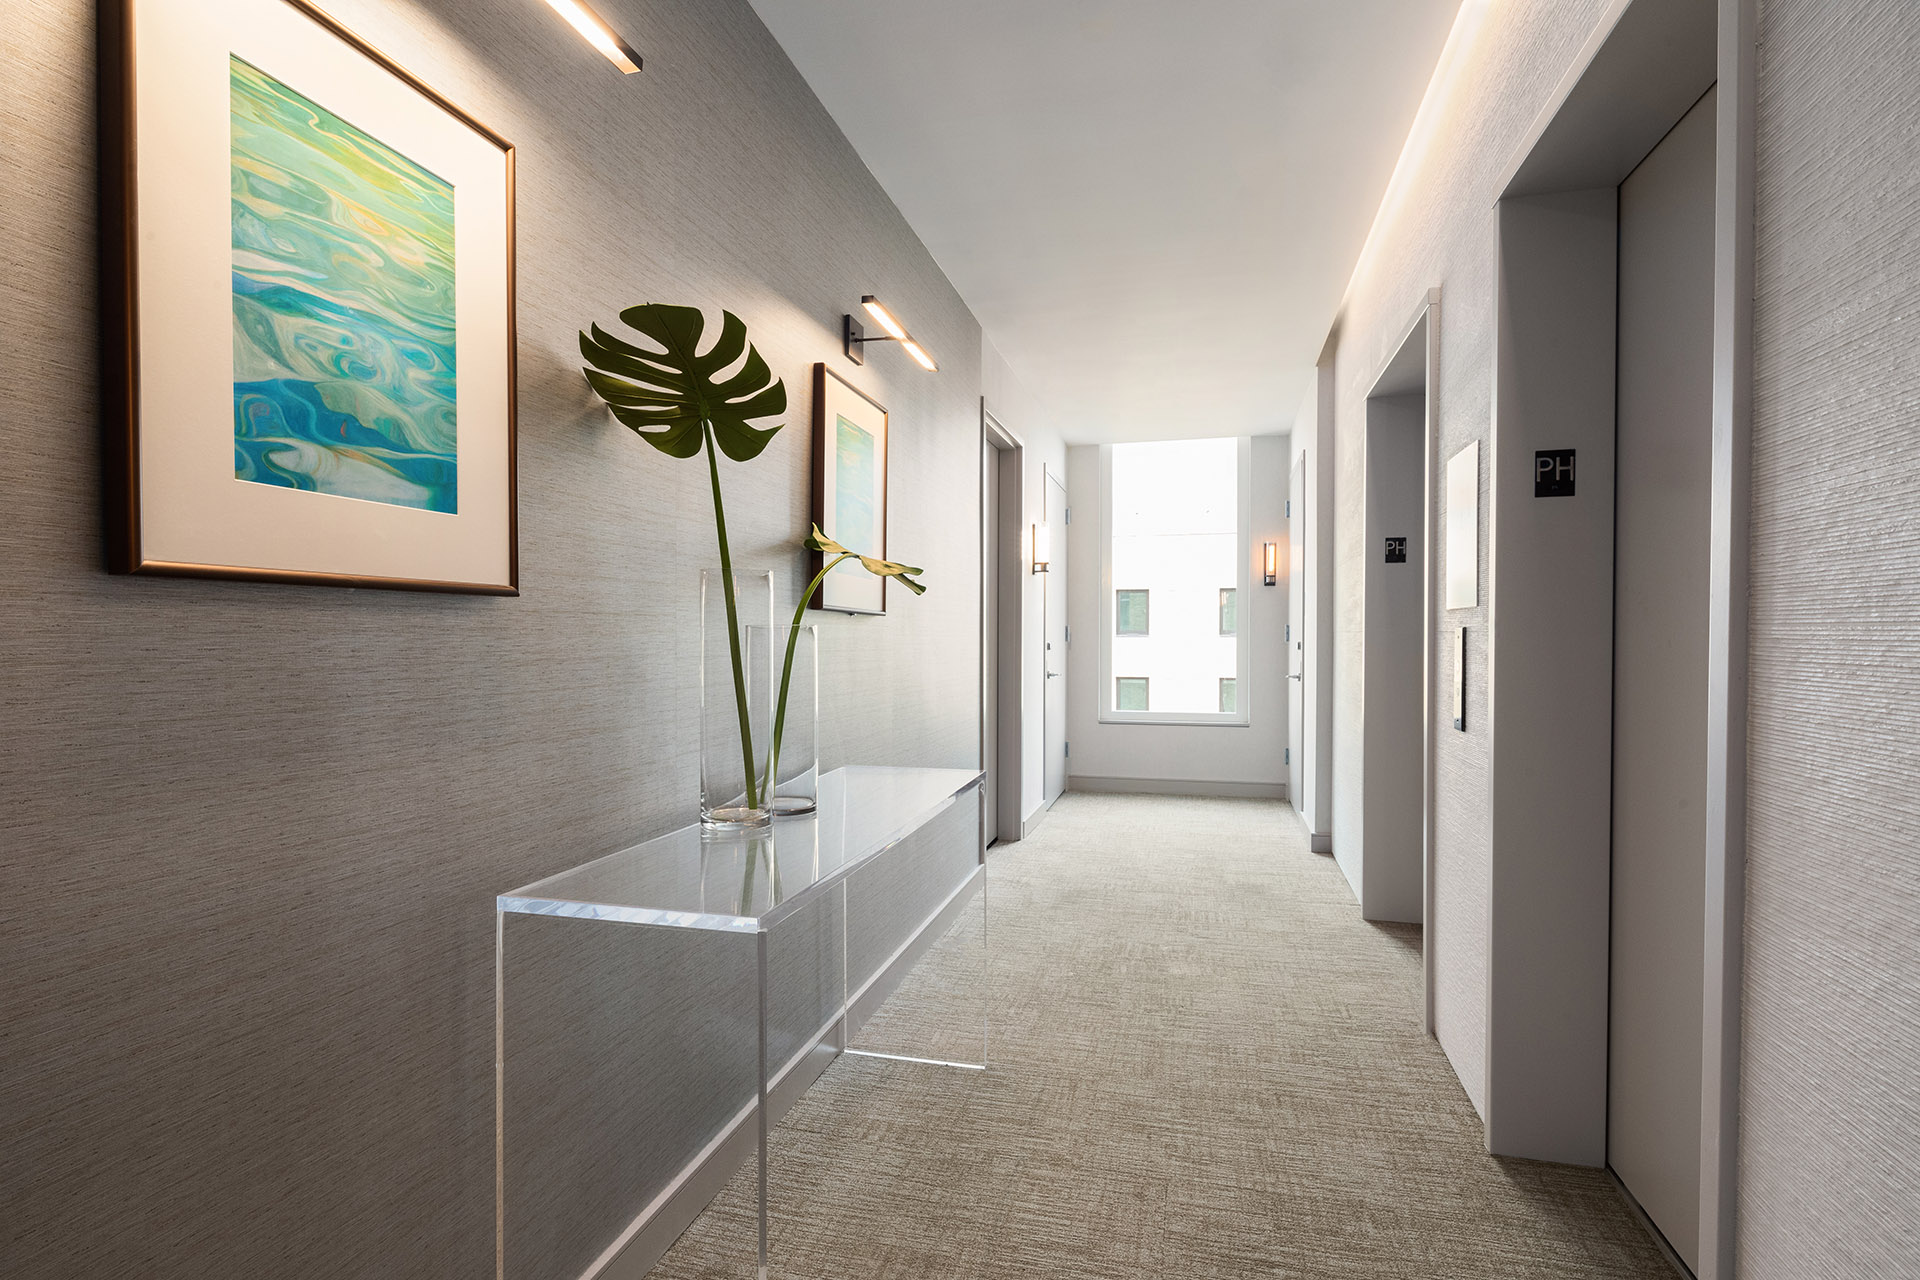 A private elevator landing allows for unmatched exclusivity and privacy.